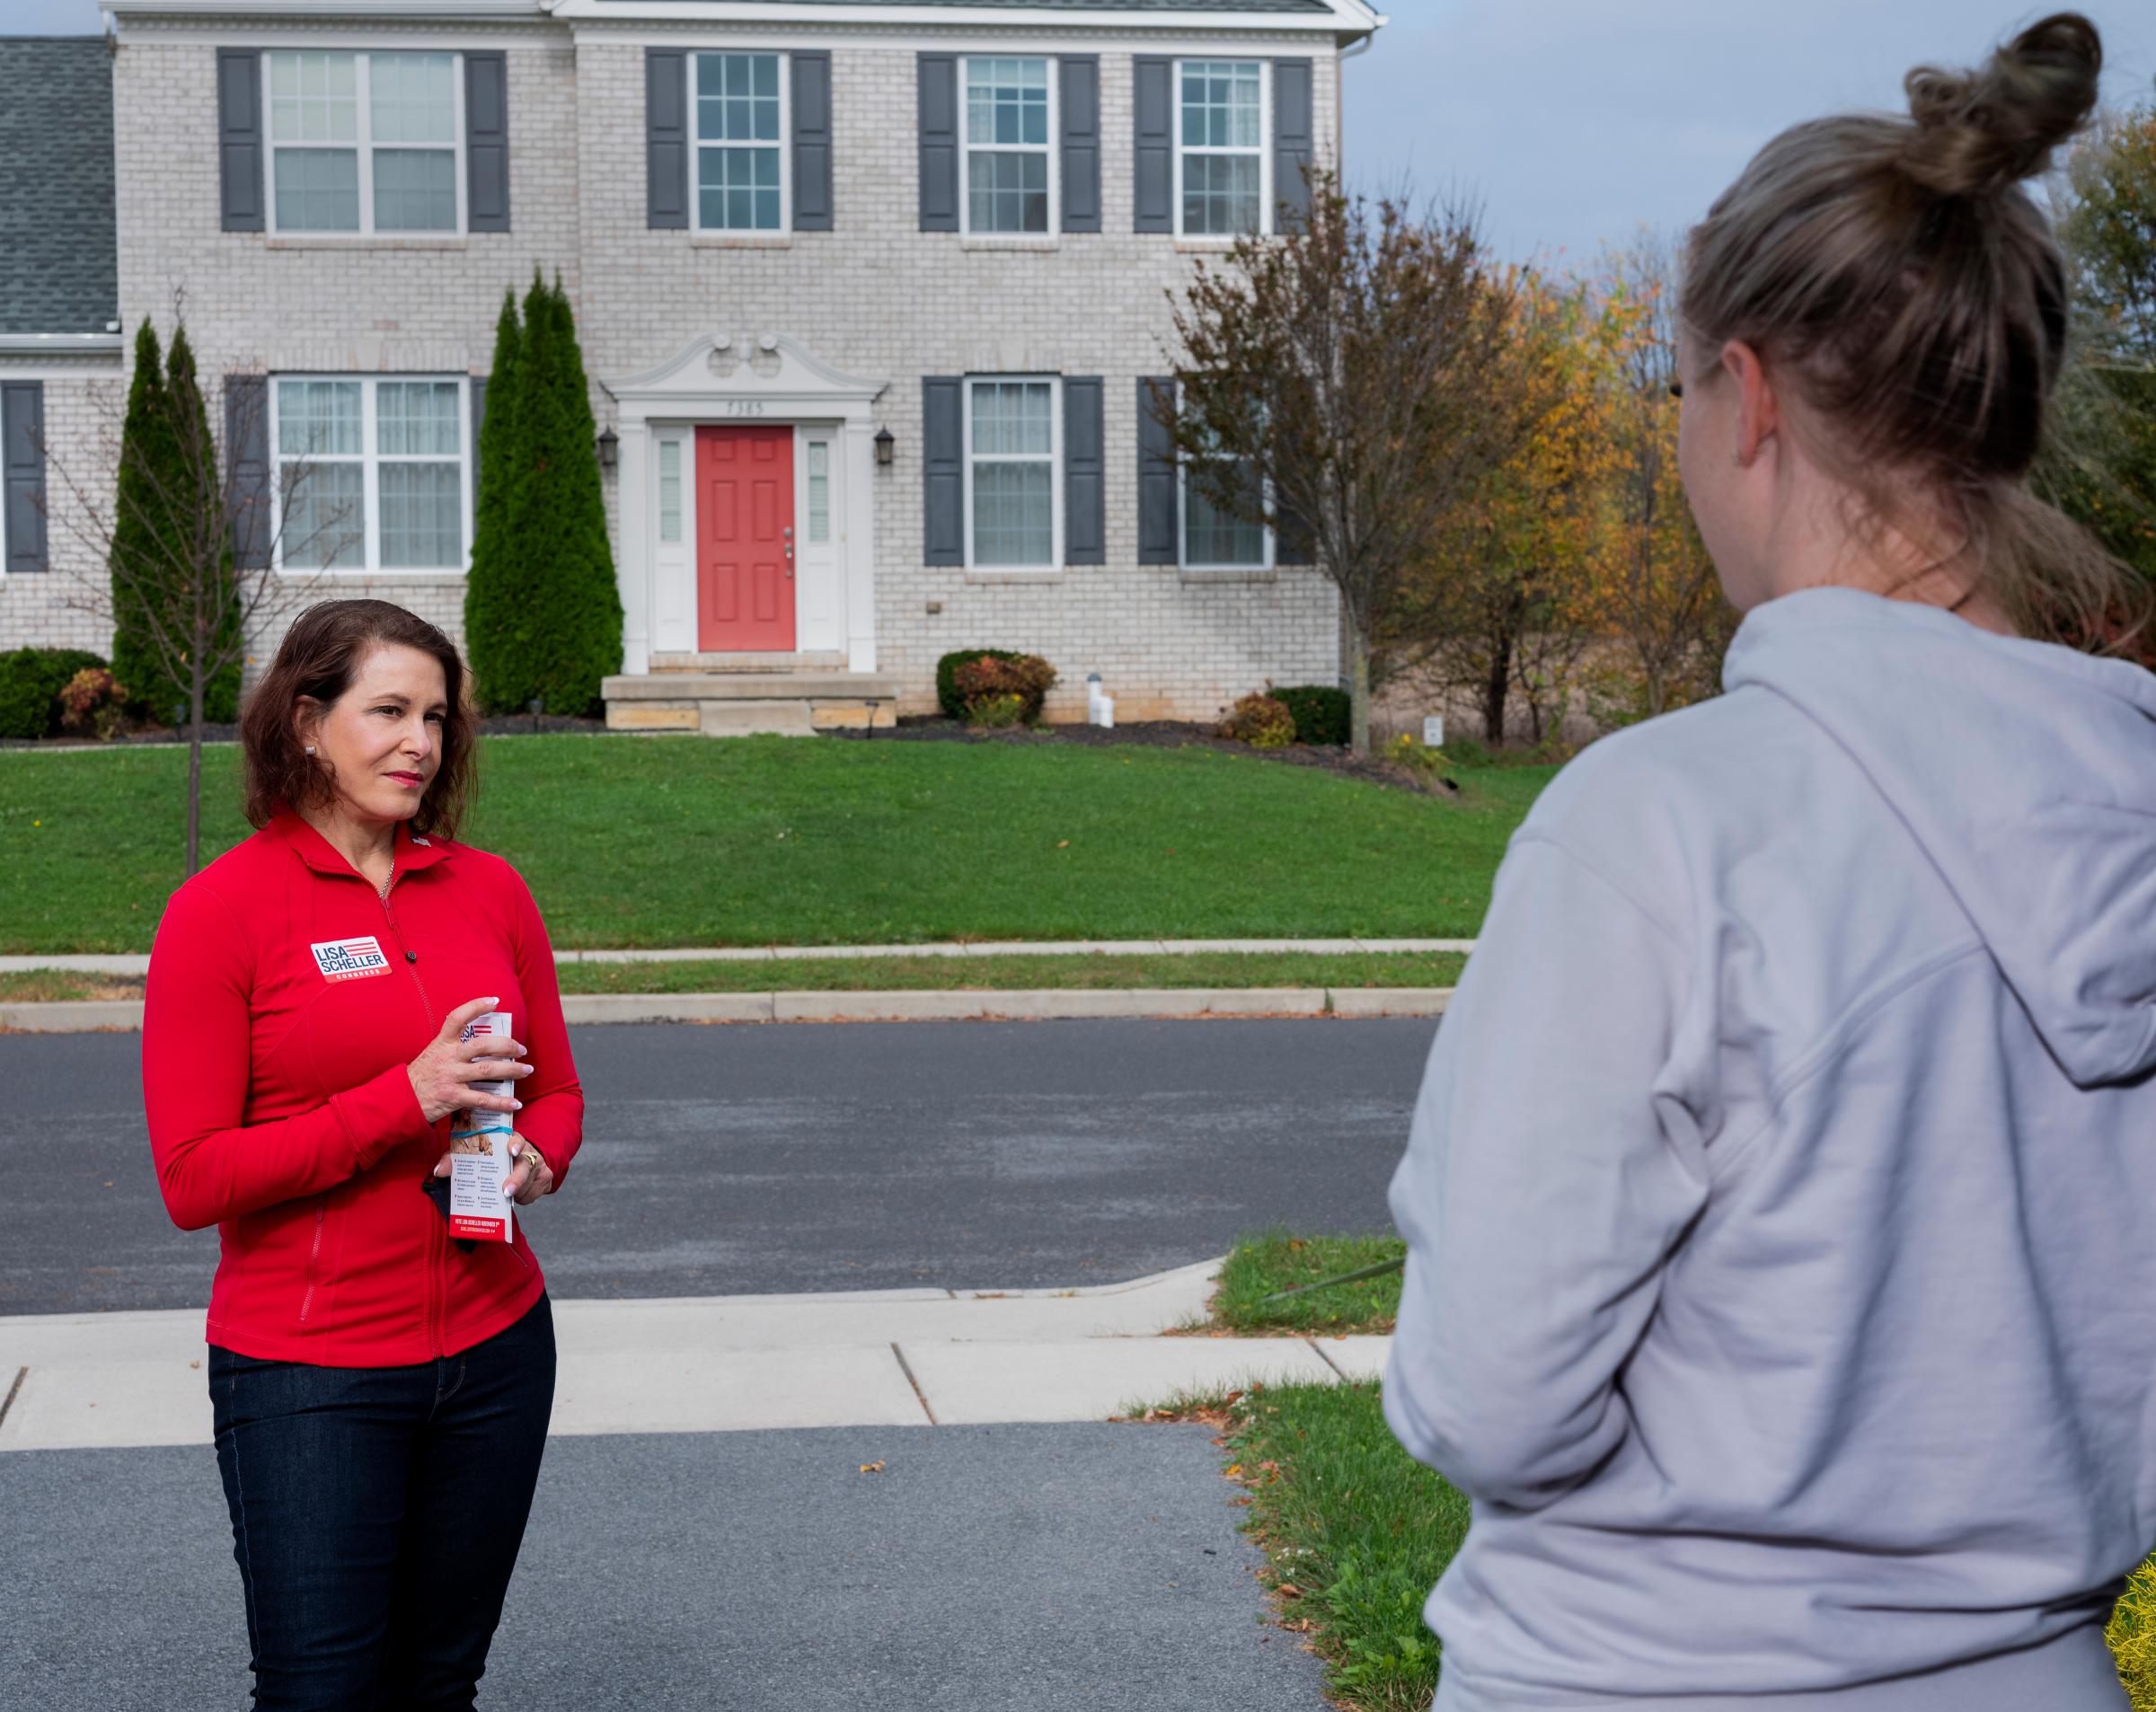 October 24, 2020 - Allentown, PA: Lisa Scheller (Republican Party) is running for election to the U.S. House to represent Pennsylvania's 7th Congressional District. On Saturday October 24th, she canvased through the morning and afternoon, following by a meet and greet.  She is on the ballot in the general election on November 3, 2020.